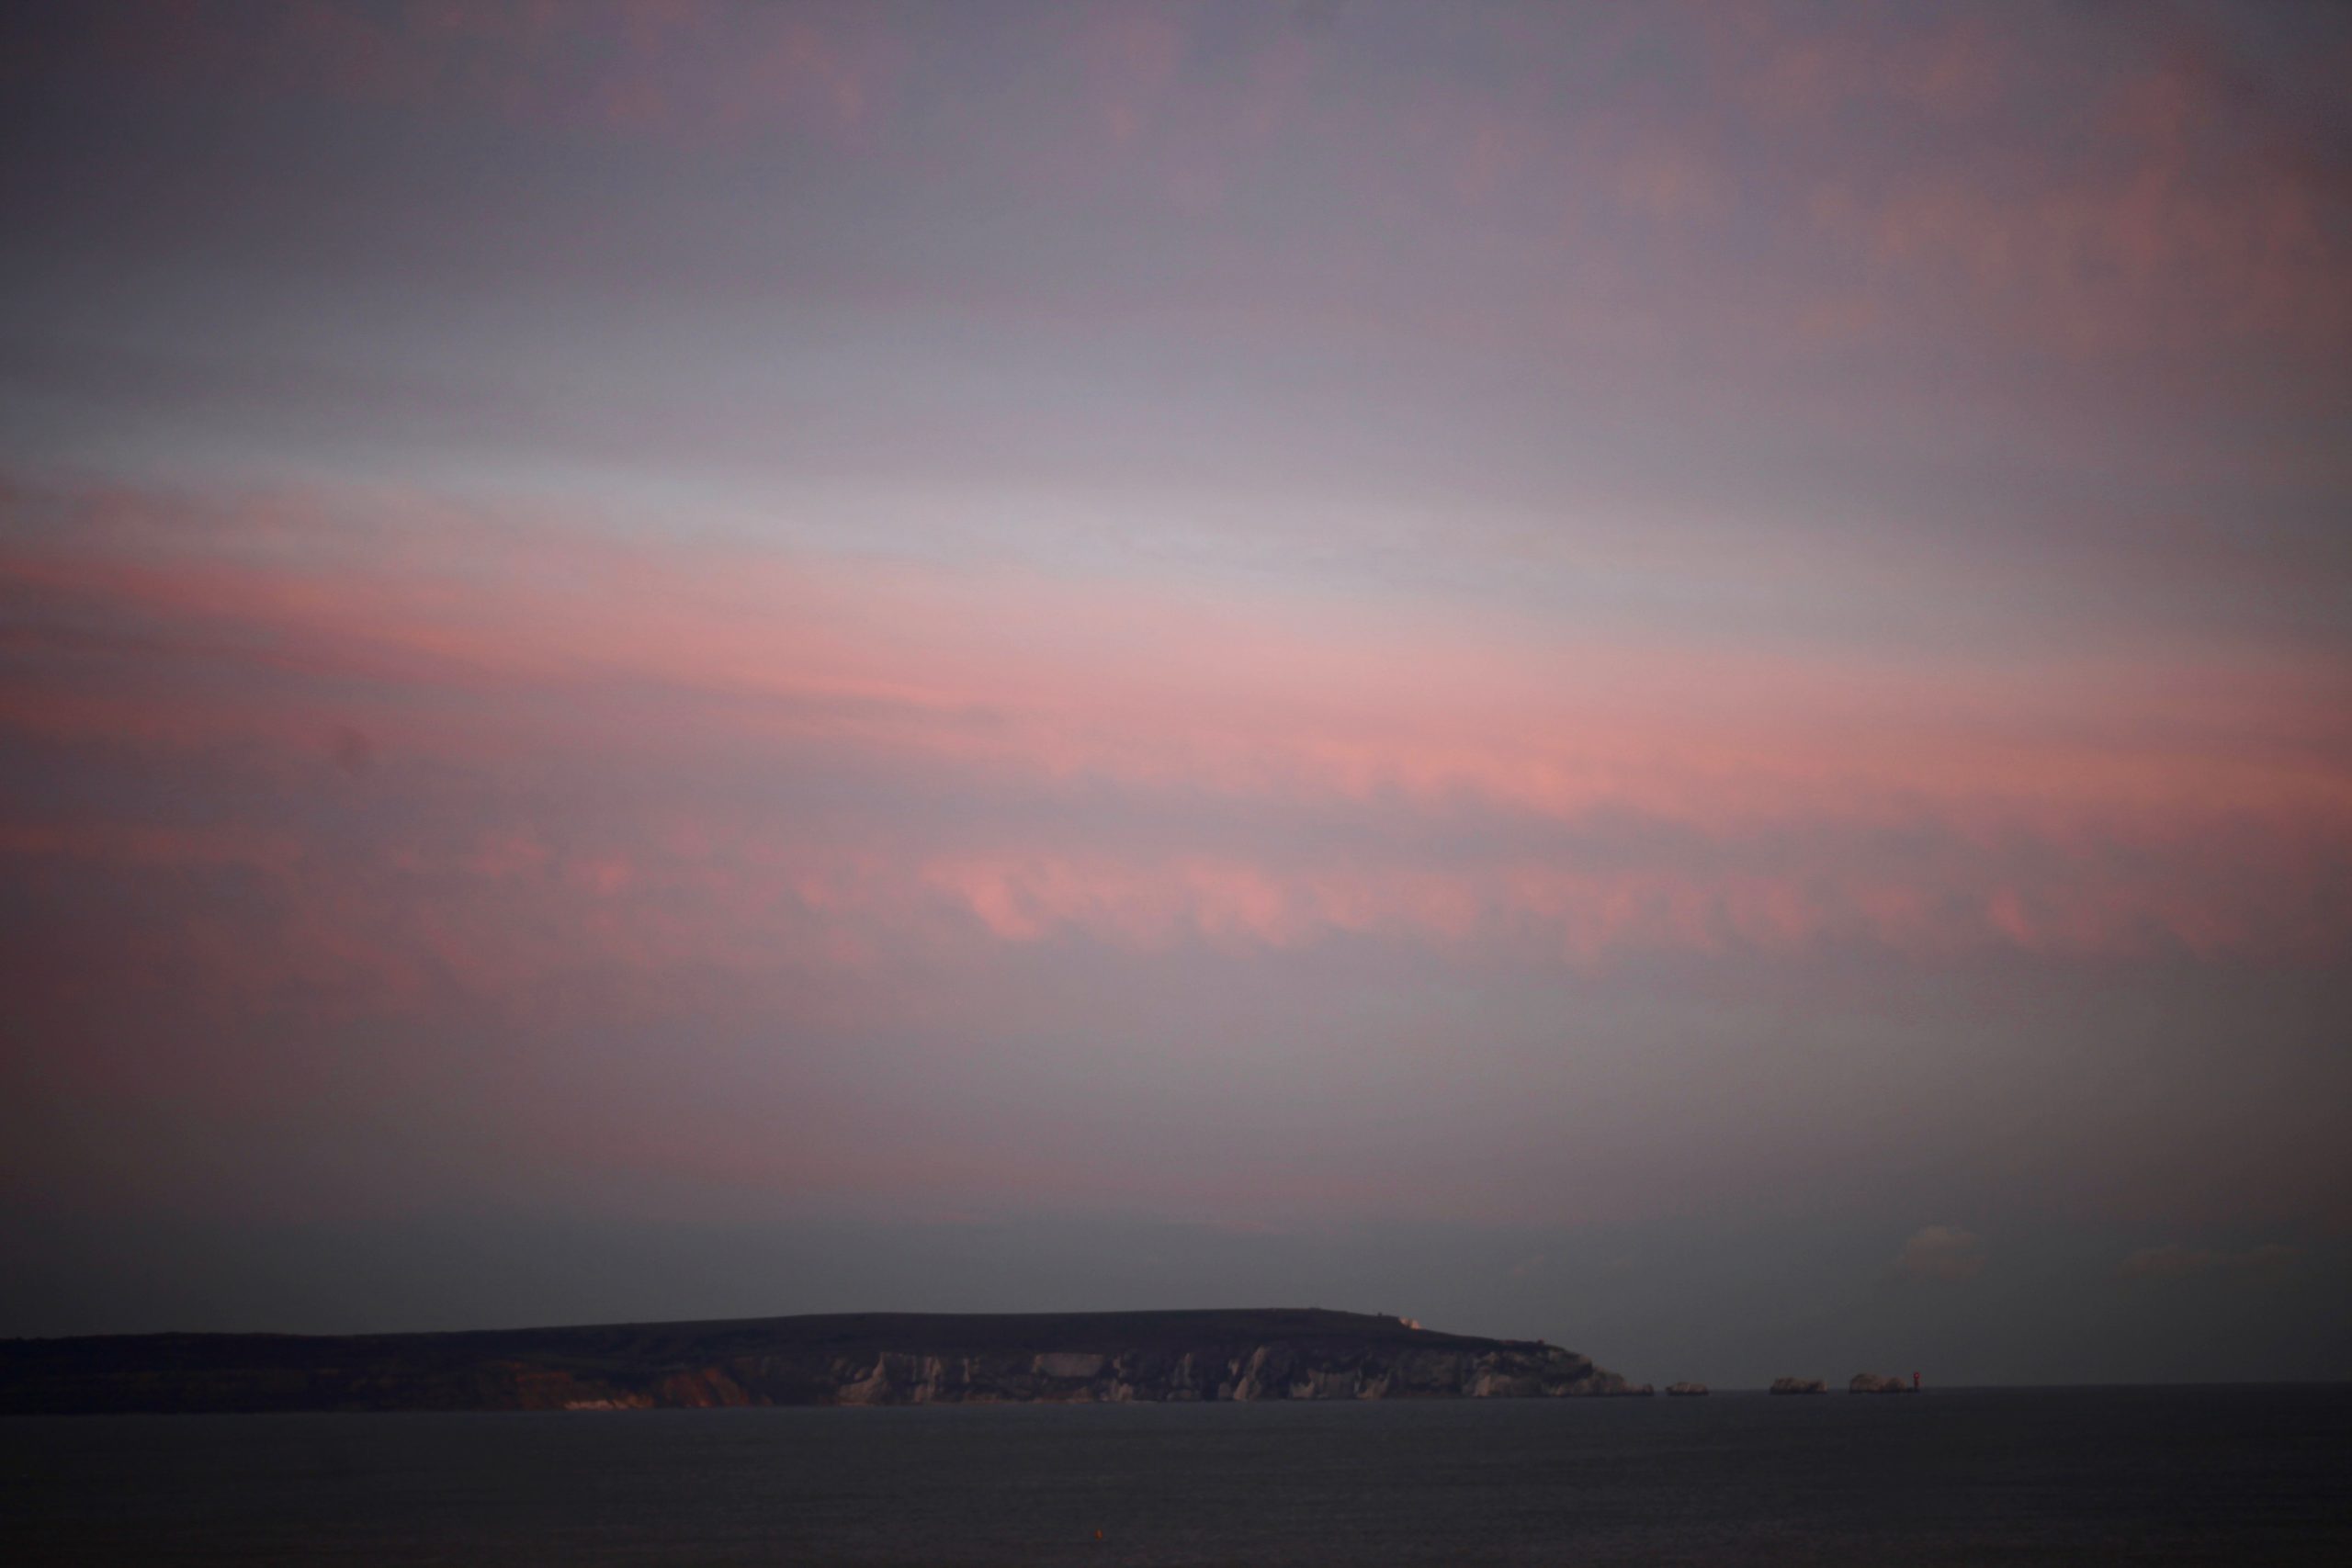 Isle of Wight at sunset